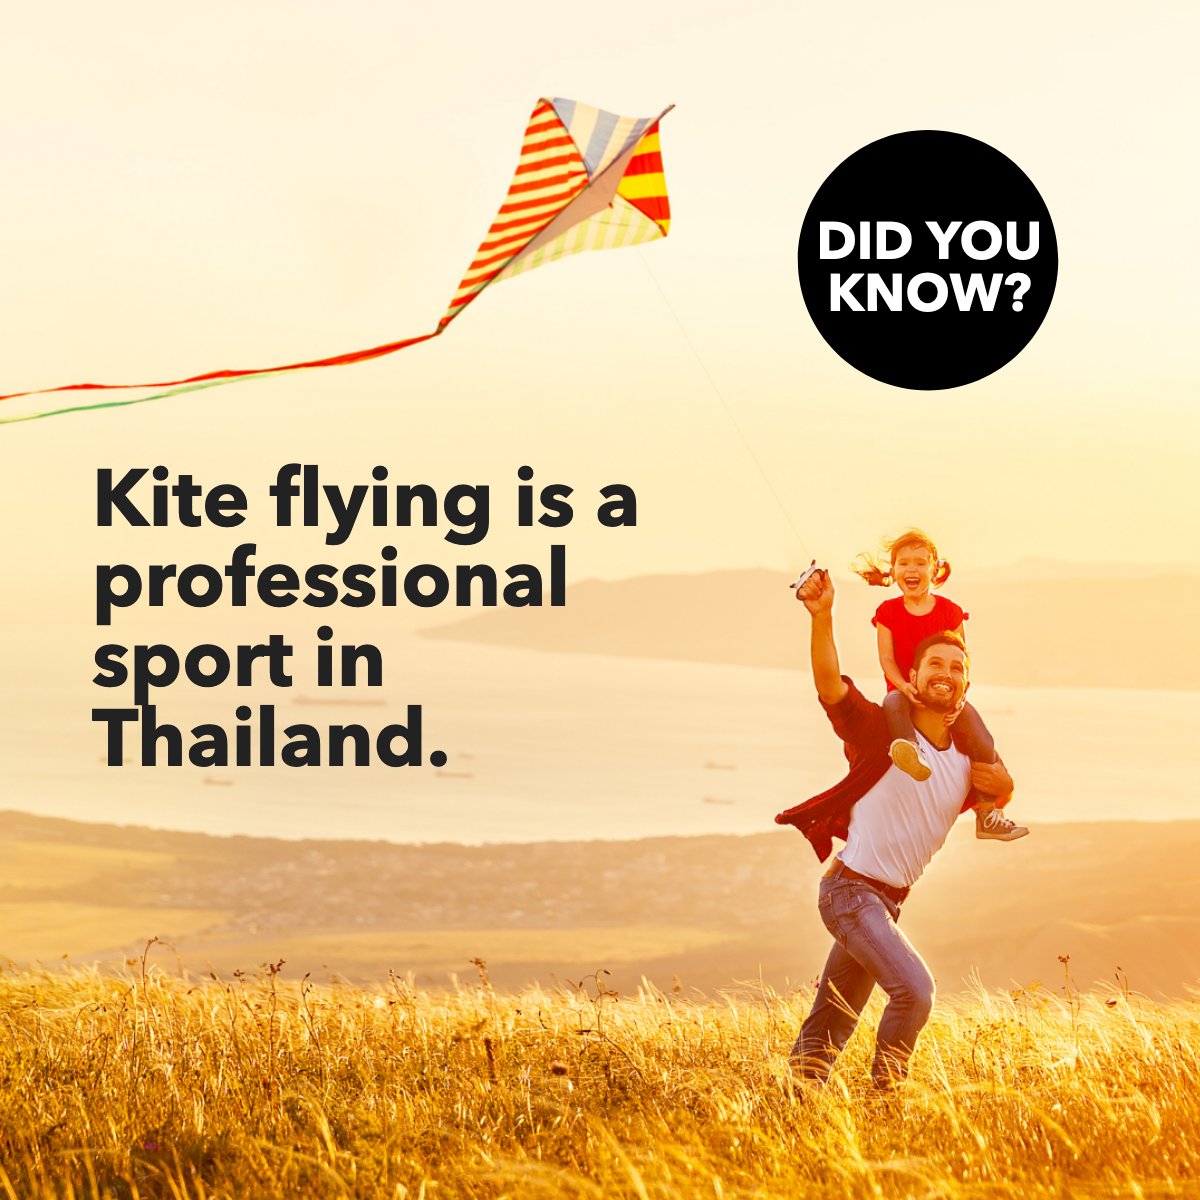 Kite flying hobby was transformed into a sport when advanced kites were developed with multiple lines, which allowed for higher control of kites. 🪁🪂

#kite #sport #hobby #kitelove #kiteparadise